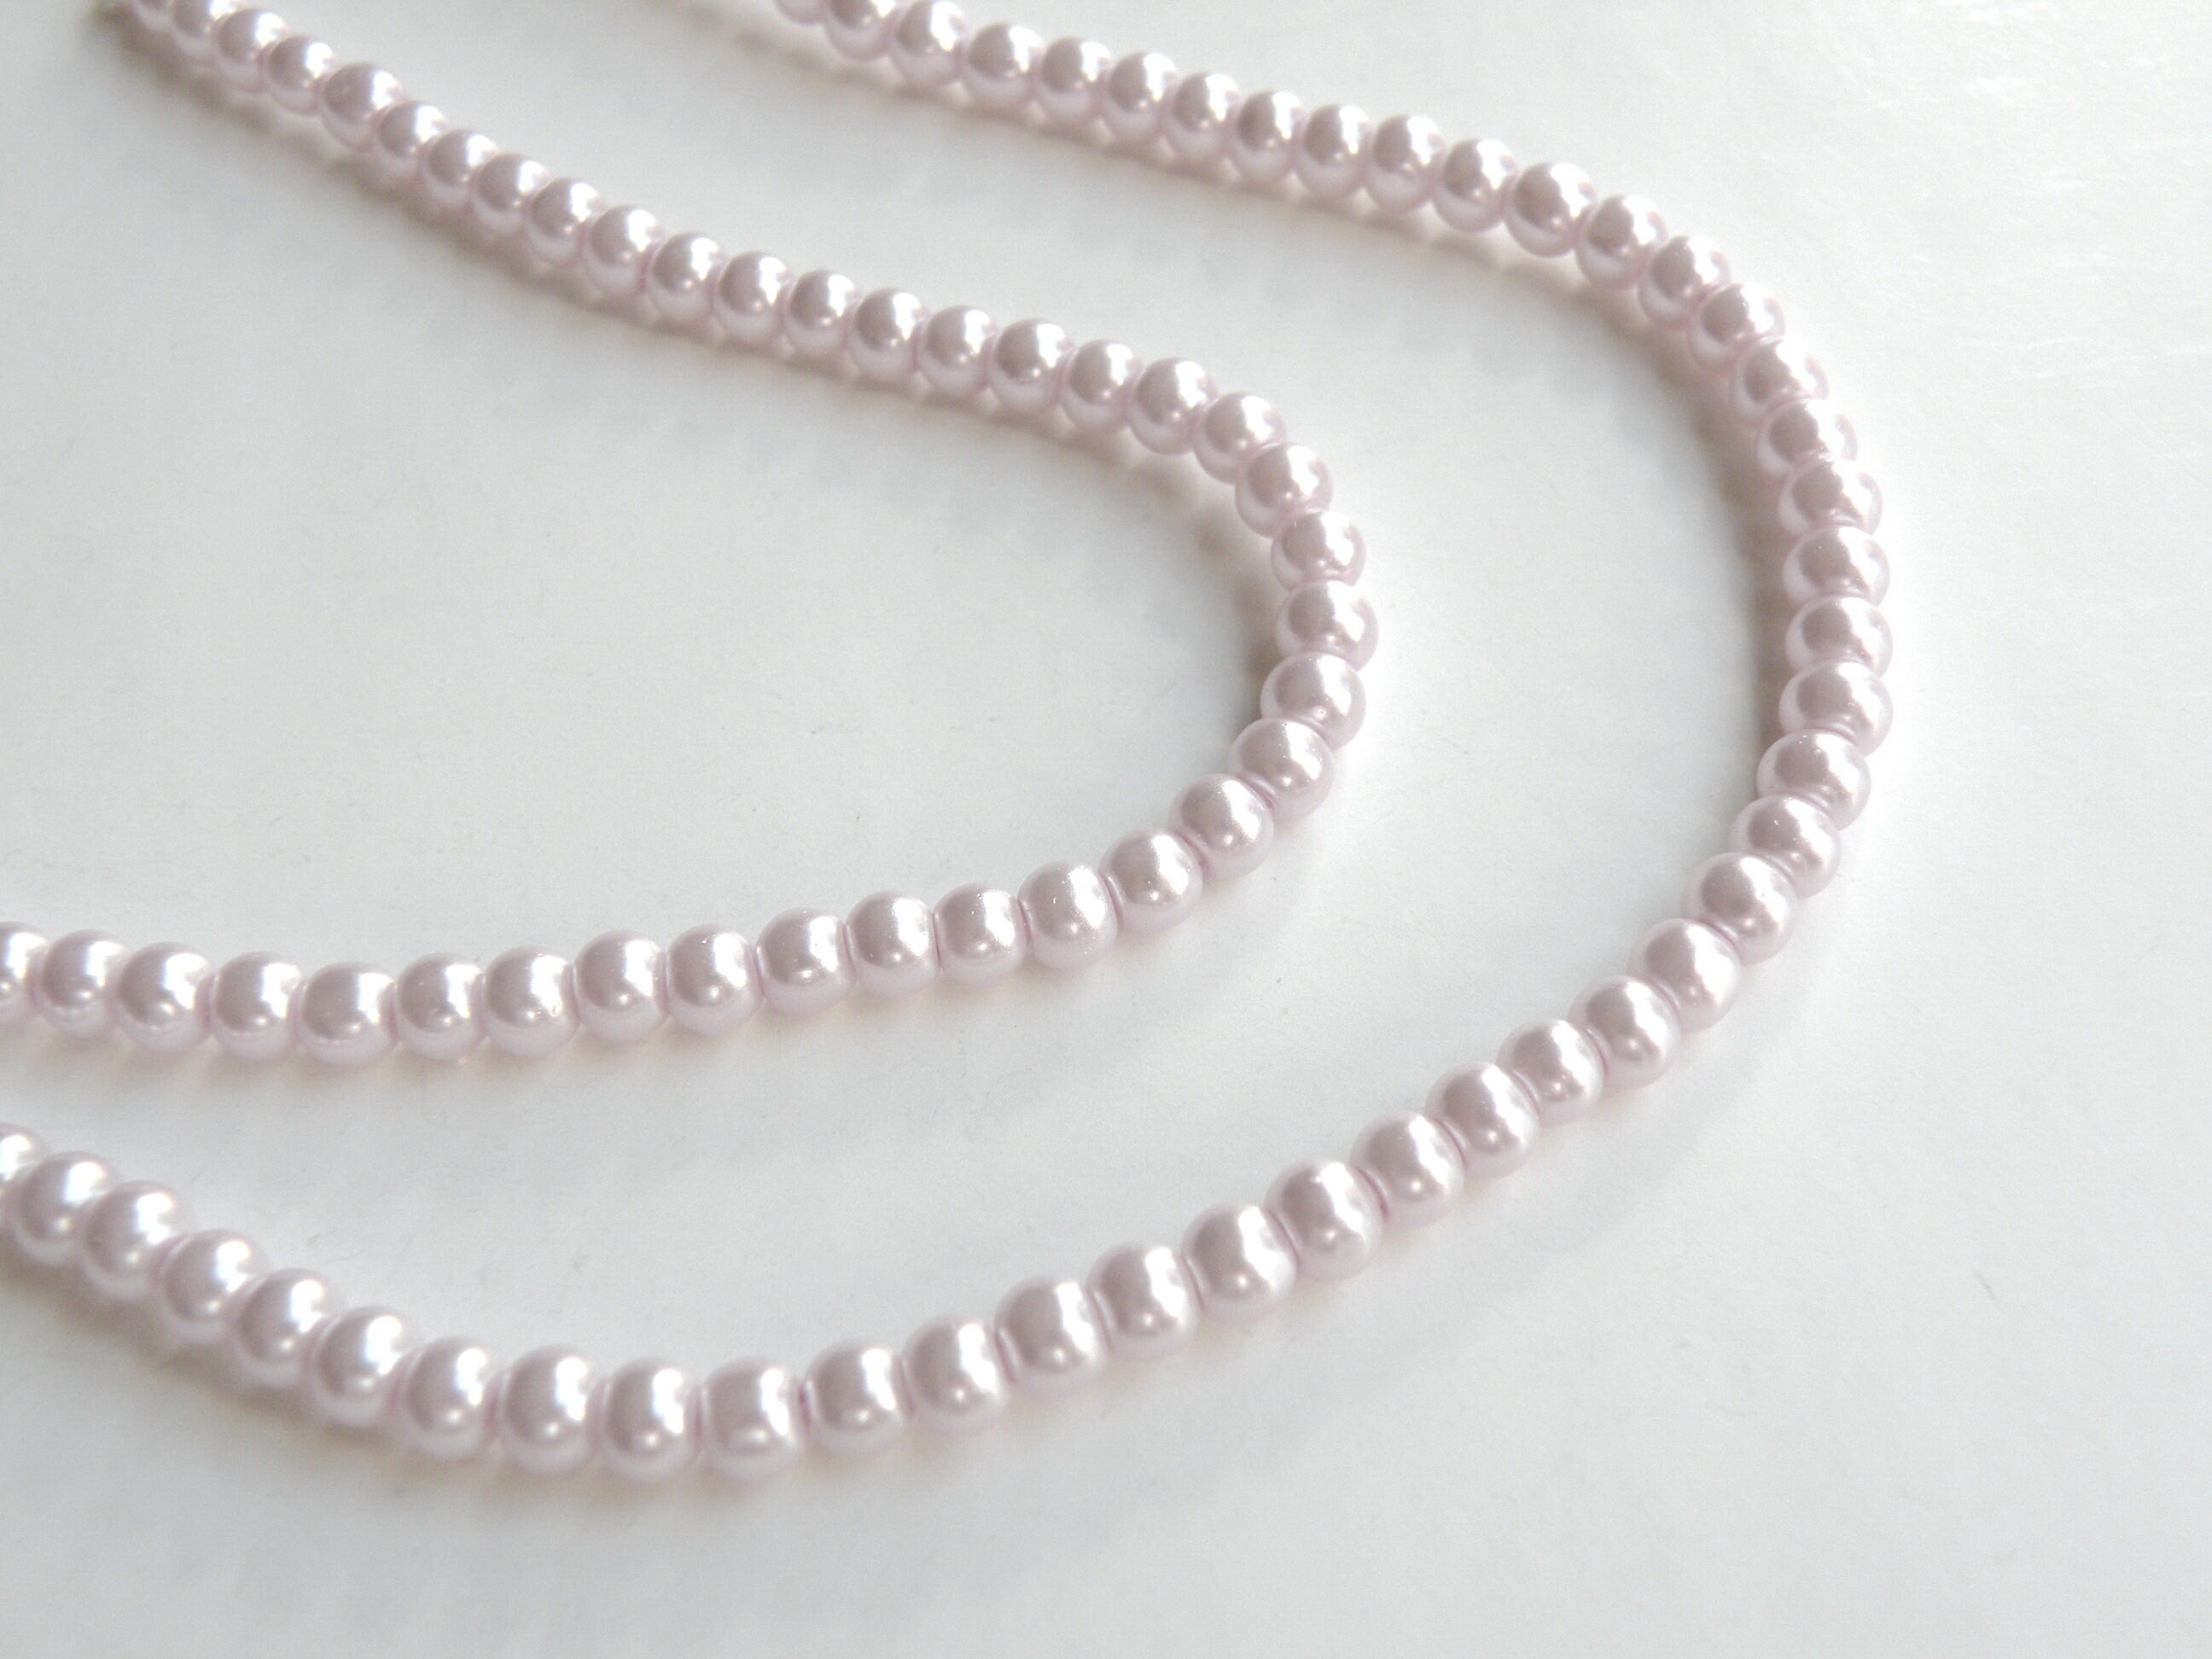 Light Pink glass pearl beads round 4mm full strand 7723GB | Etsy